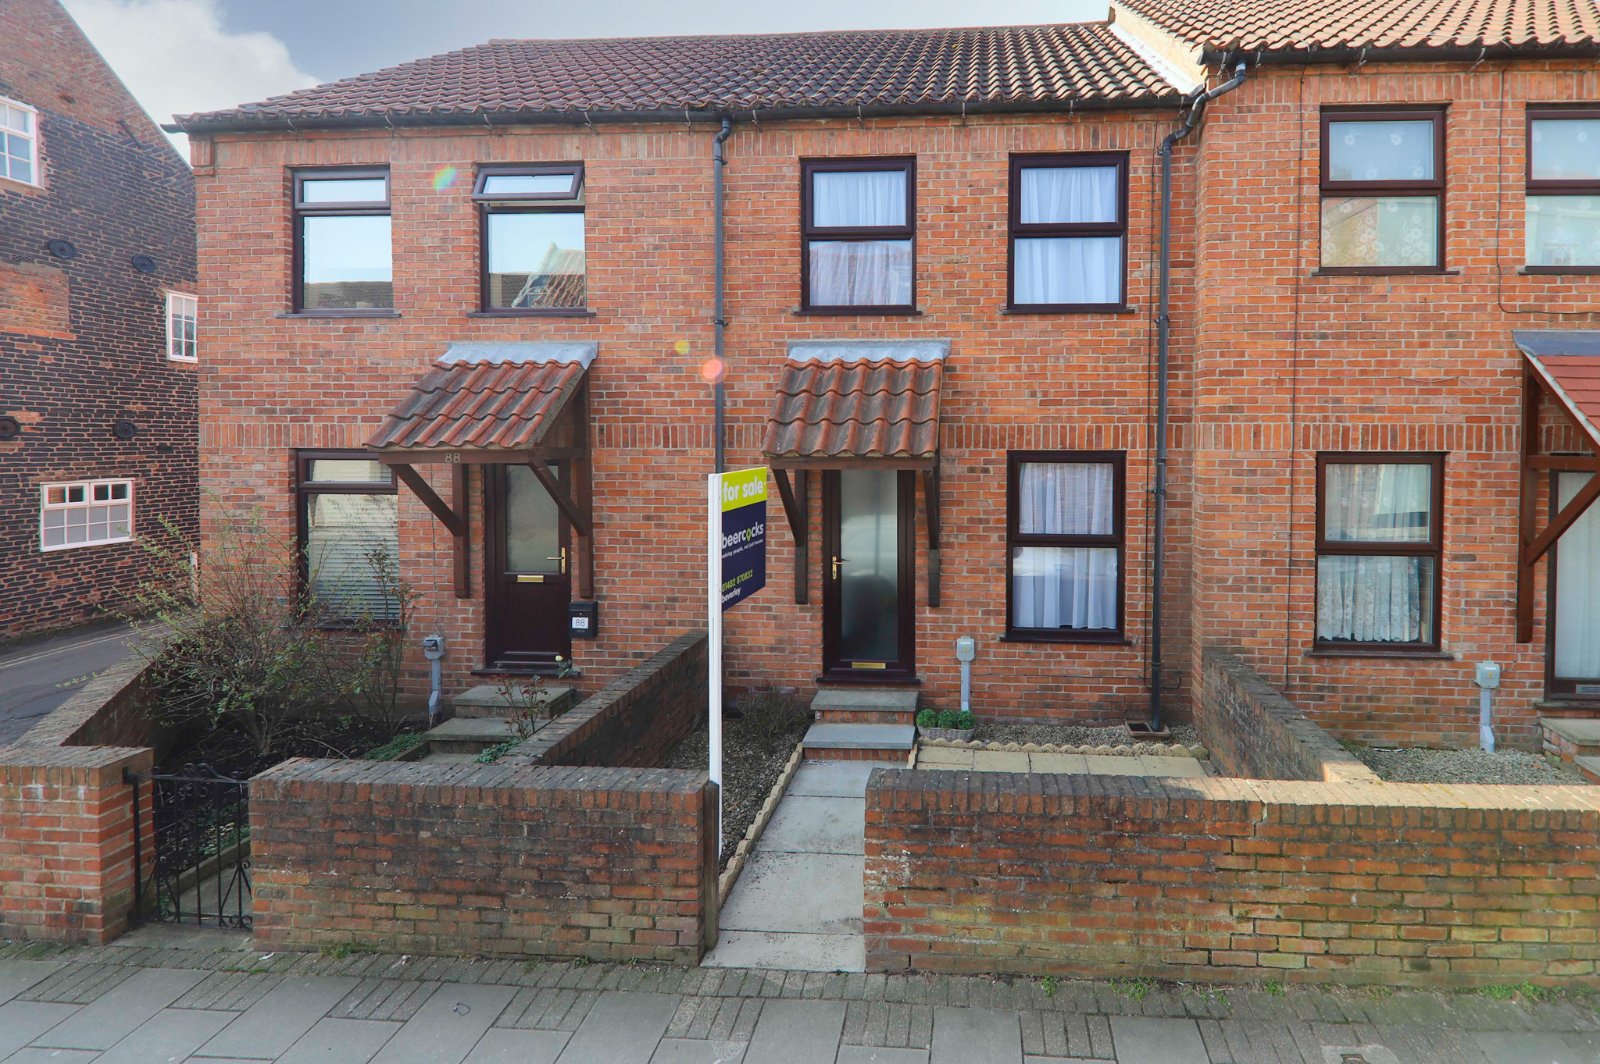 2 bed house for sale in Walkergate, Beverley - Property Image 1